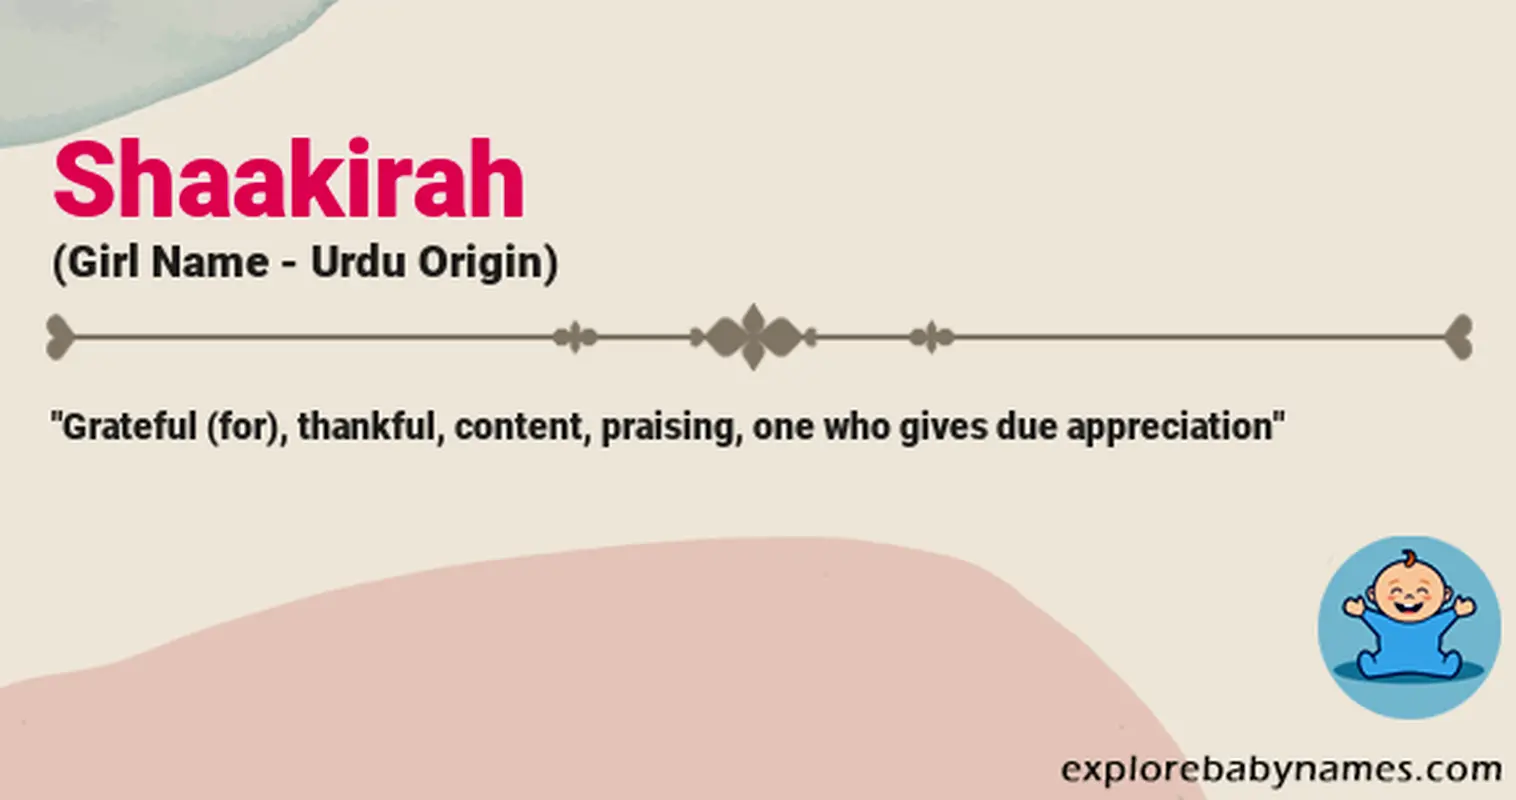 Meaning of Shaakirah